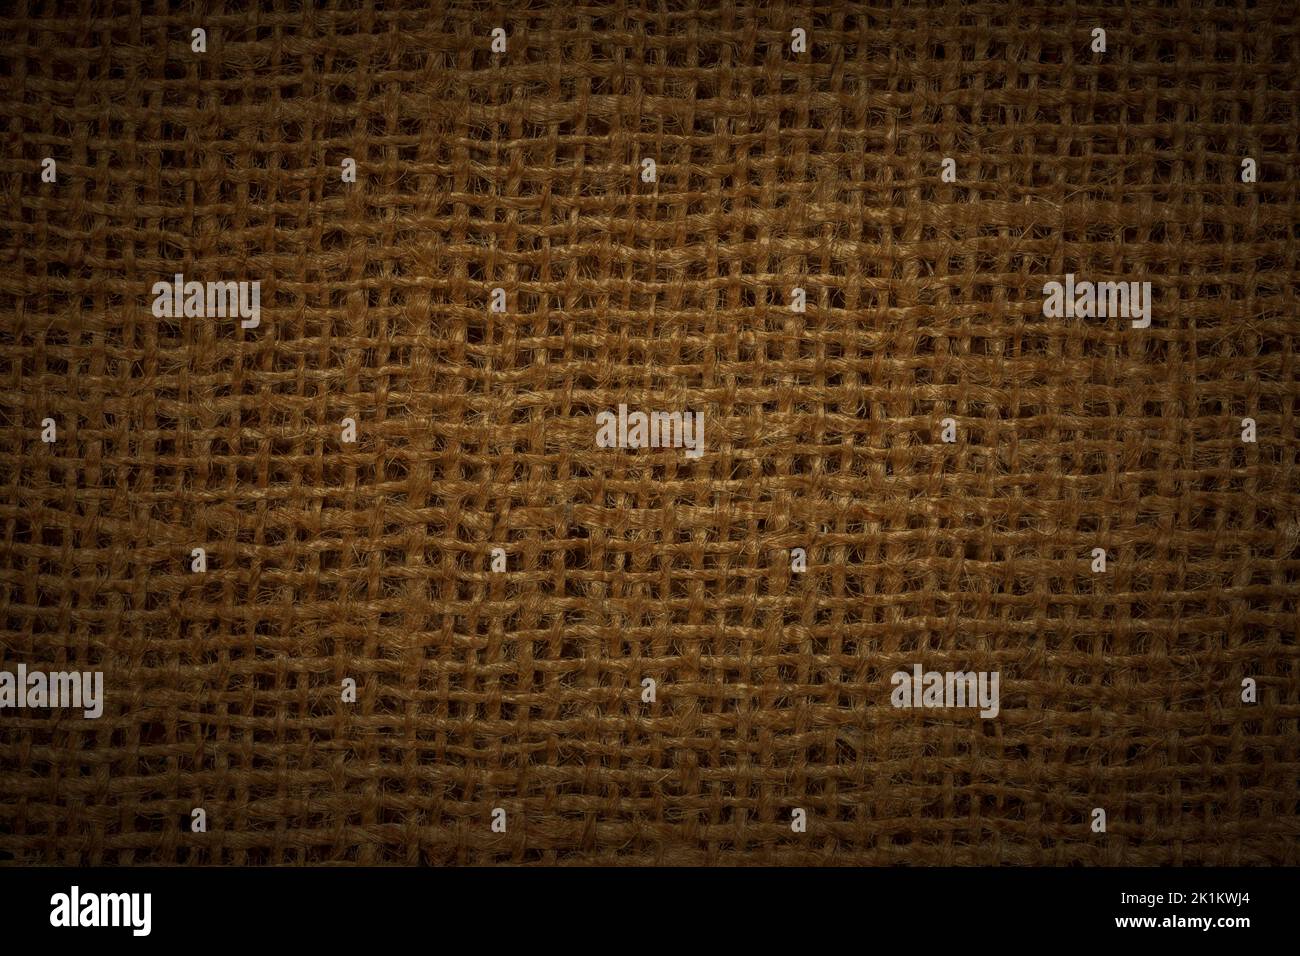 abstract rustic background: close up of dark brown burlap texture Stock Photo